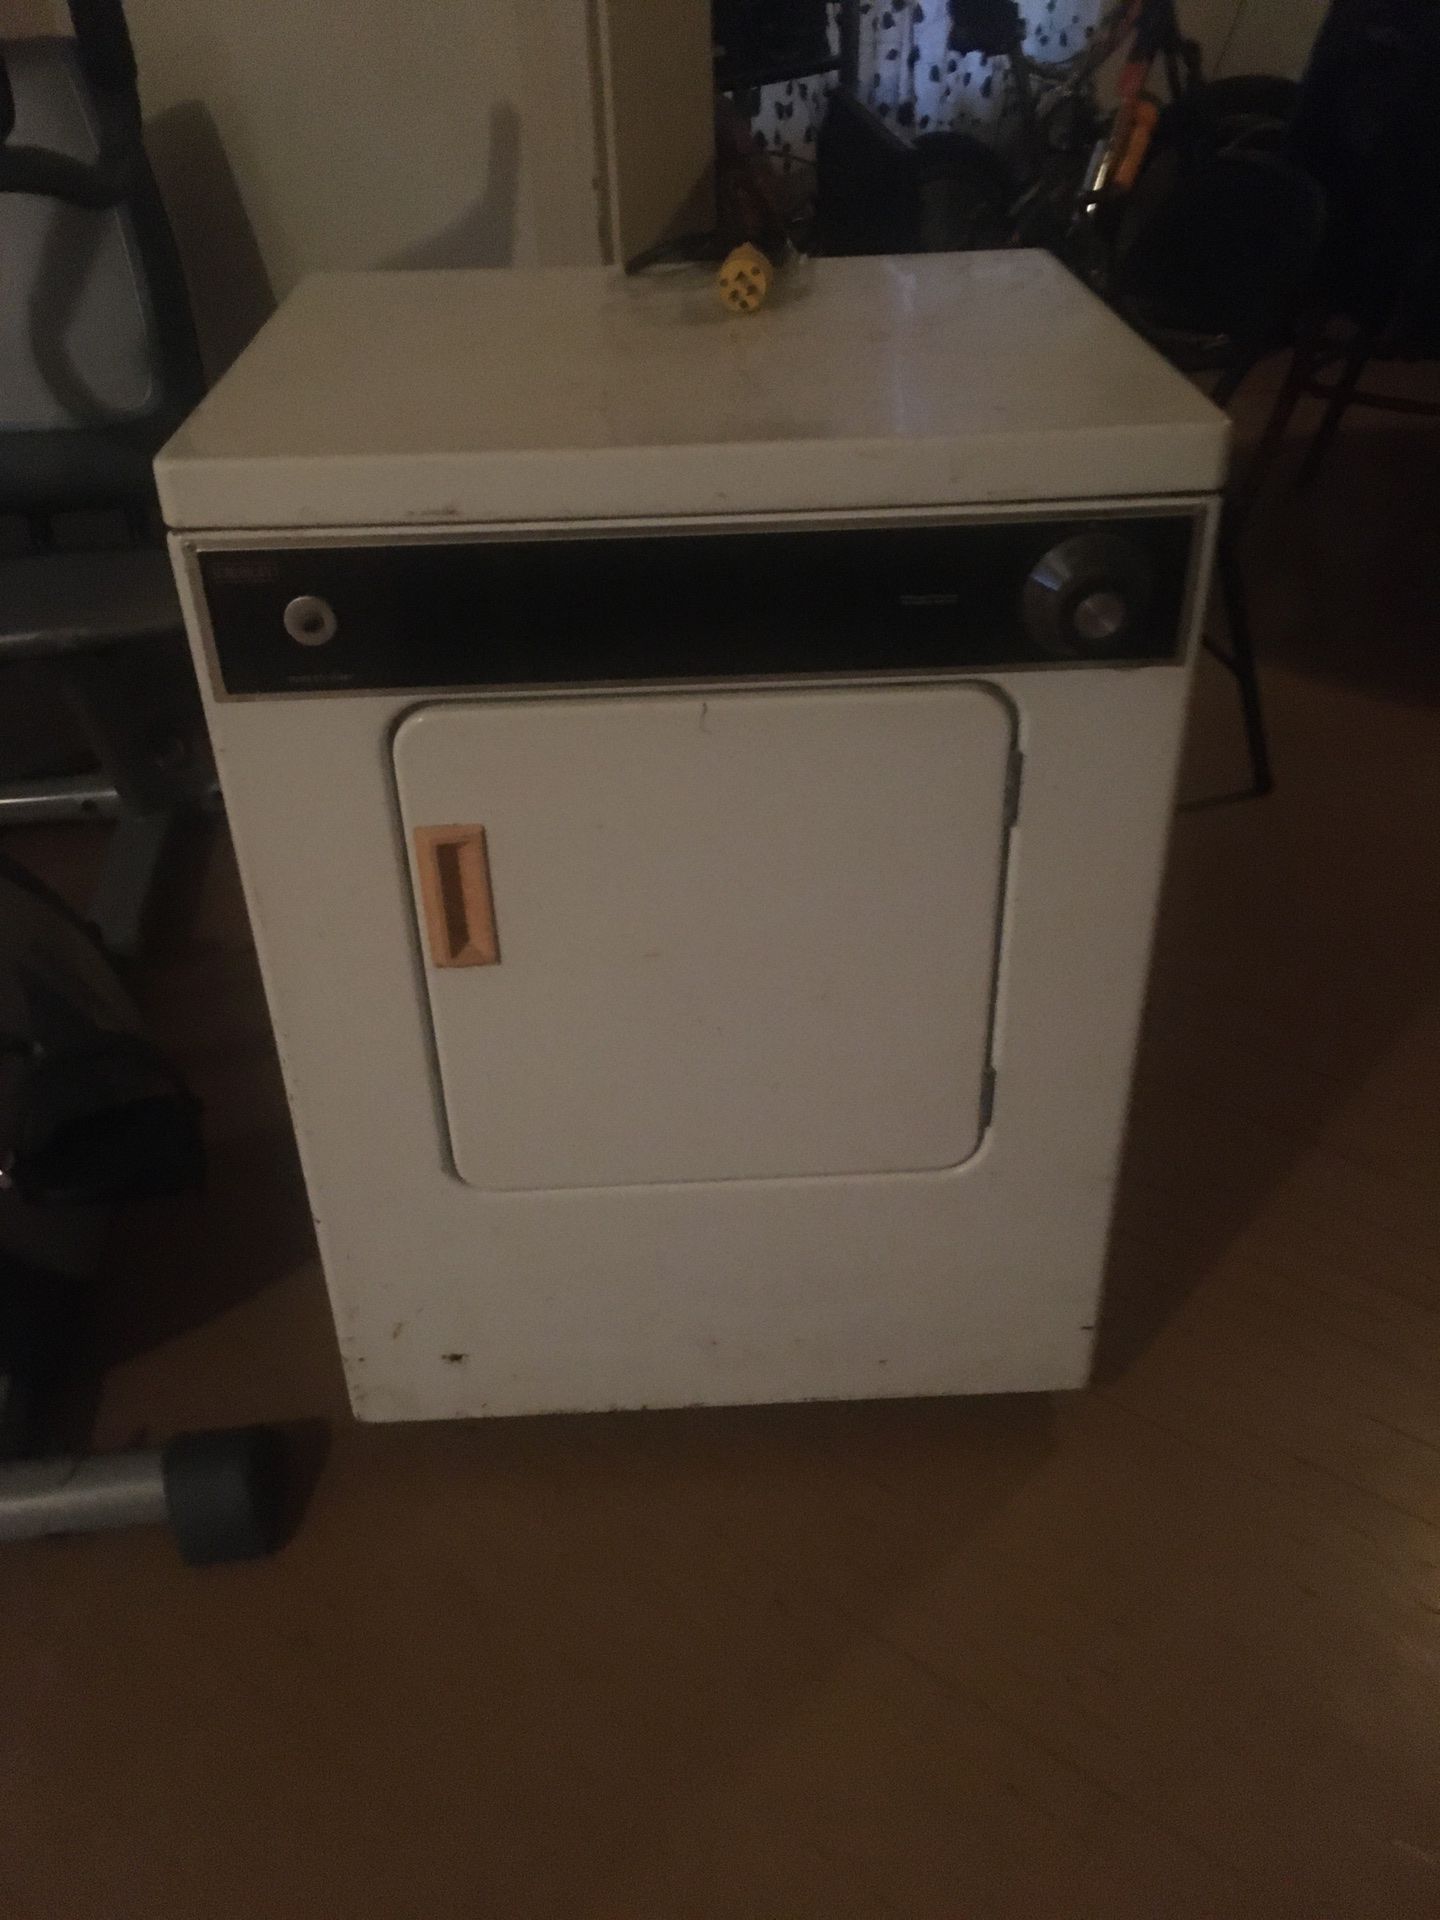 Small apartment dryer